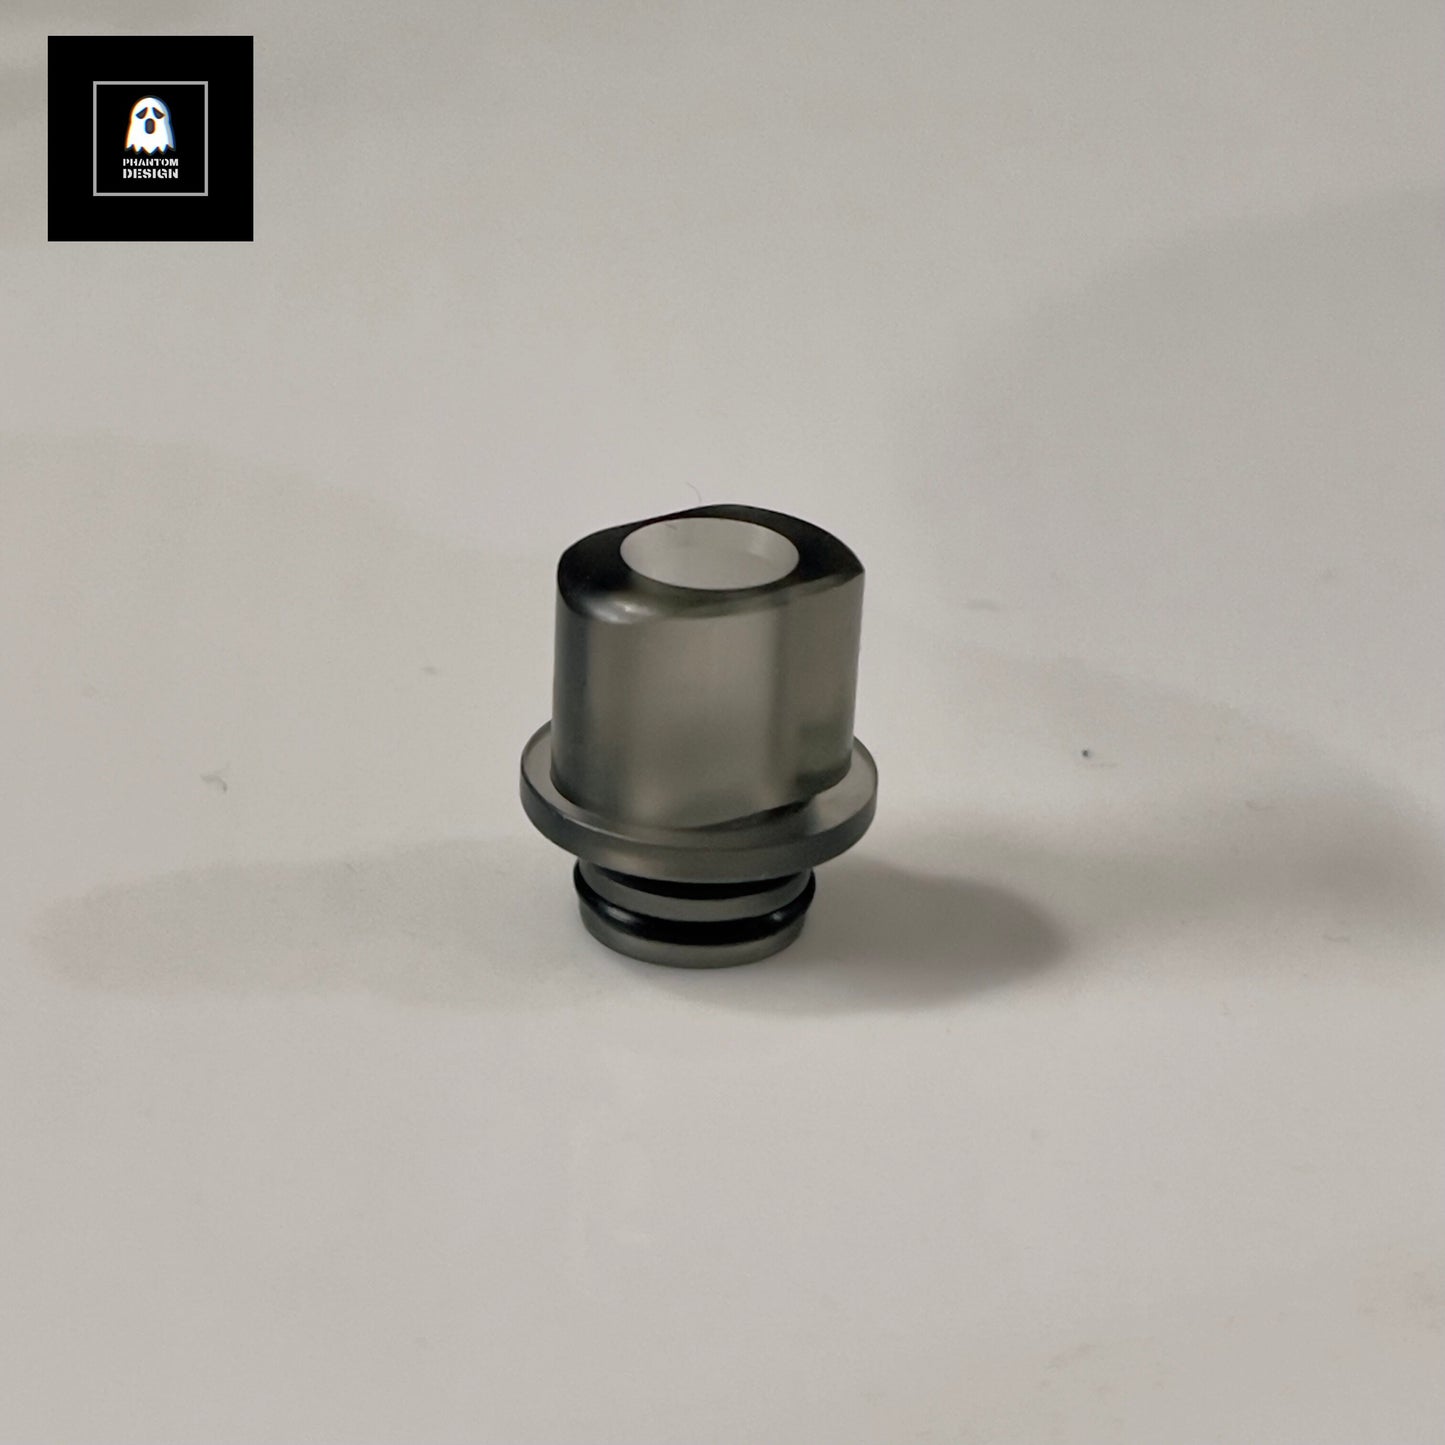 Phantom Design Premium Hand Crafted Frosted 510 Drip Tip 